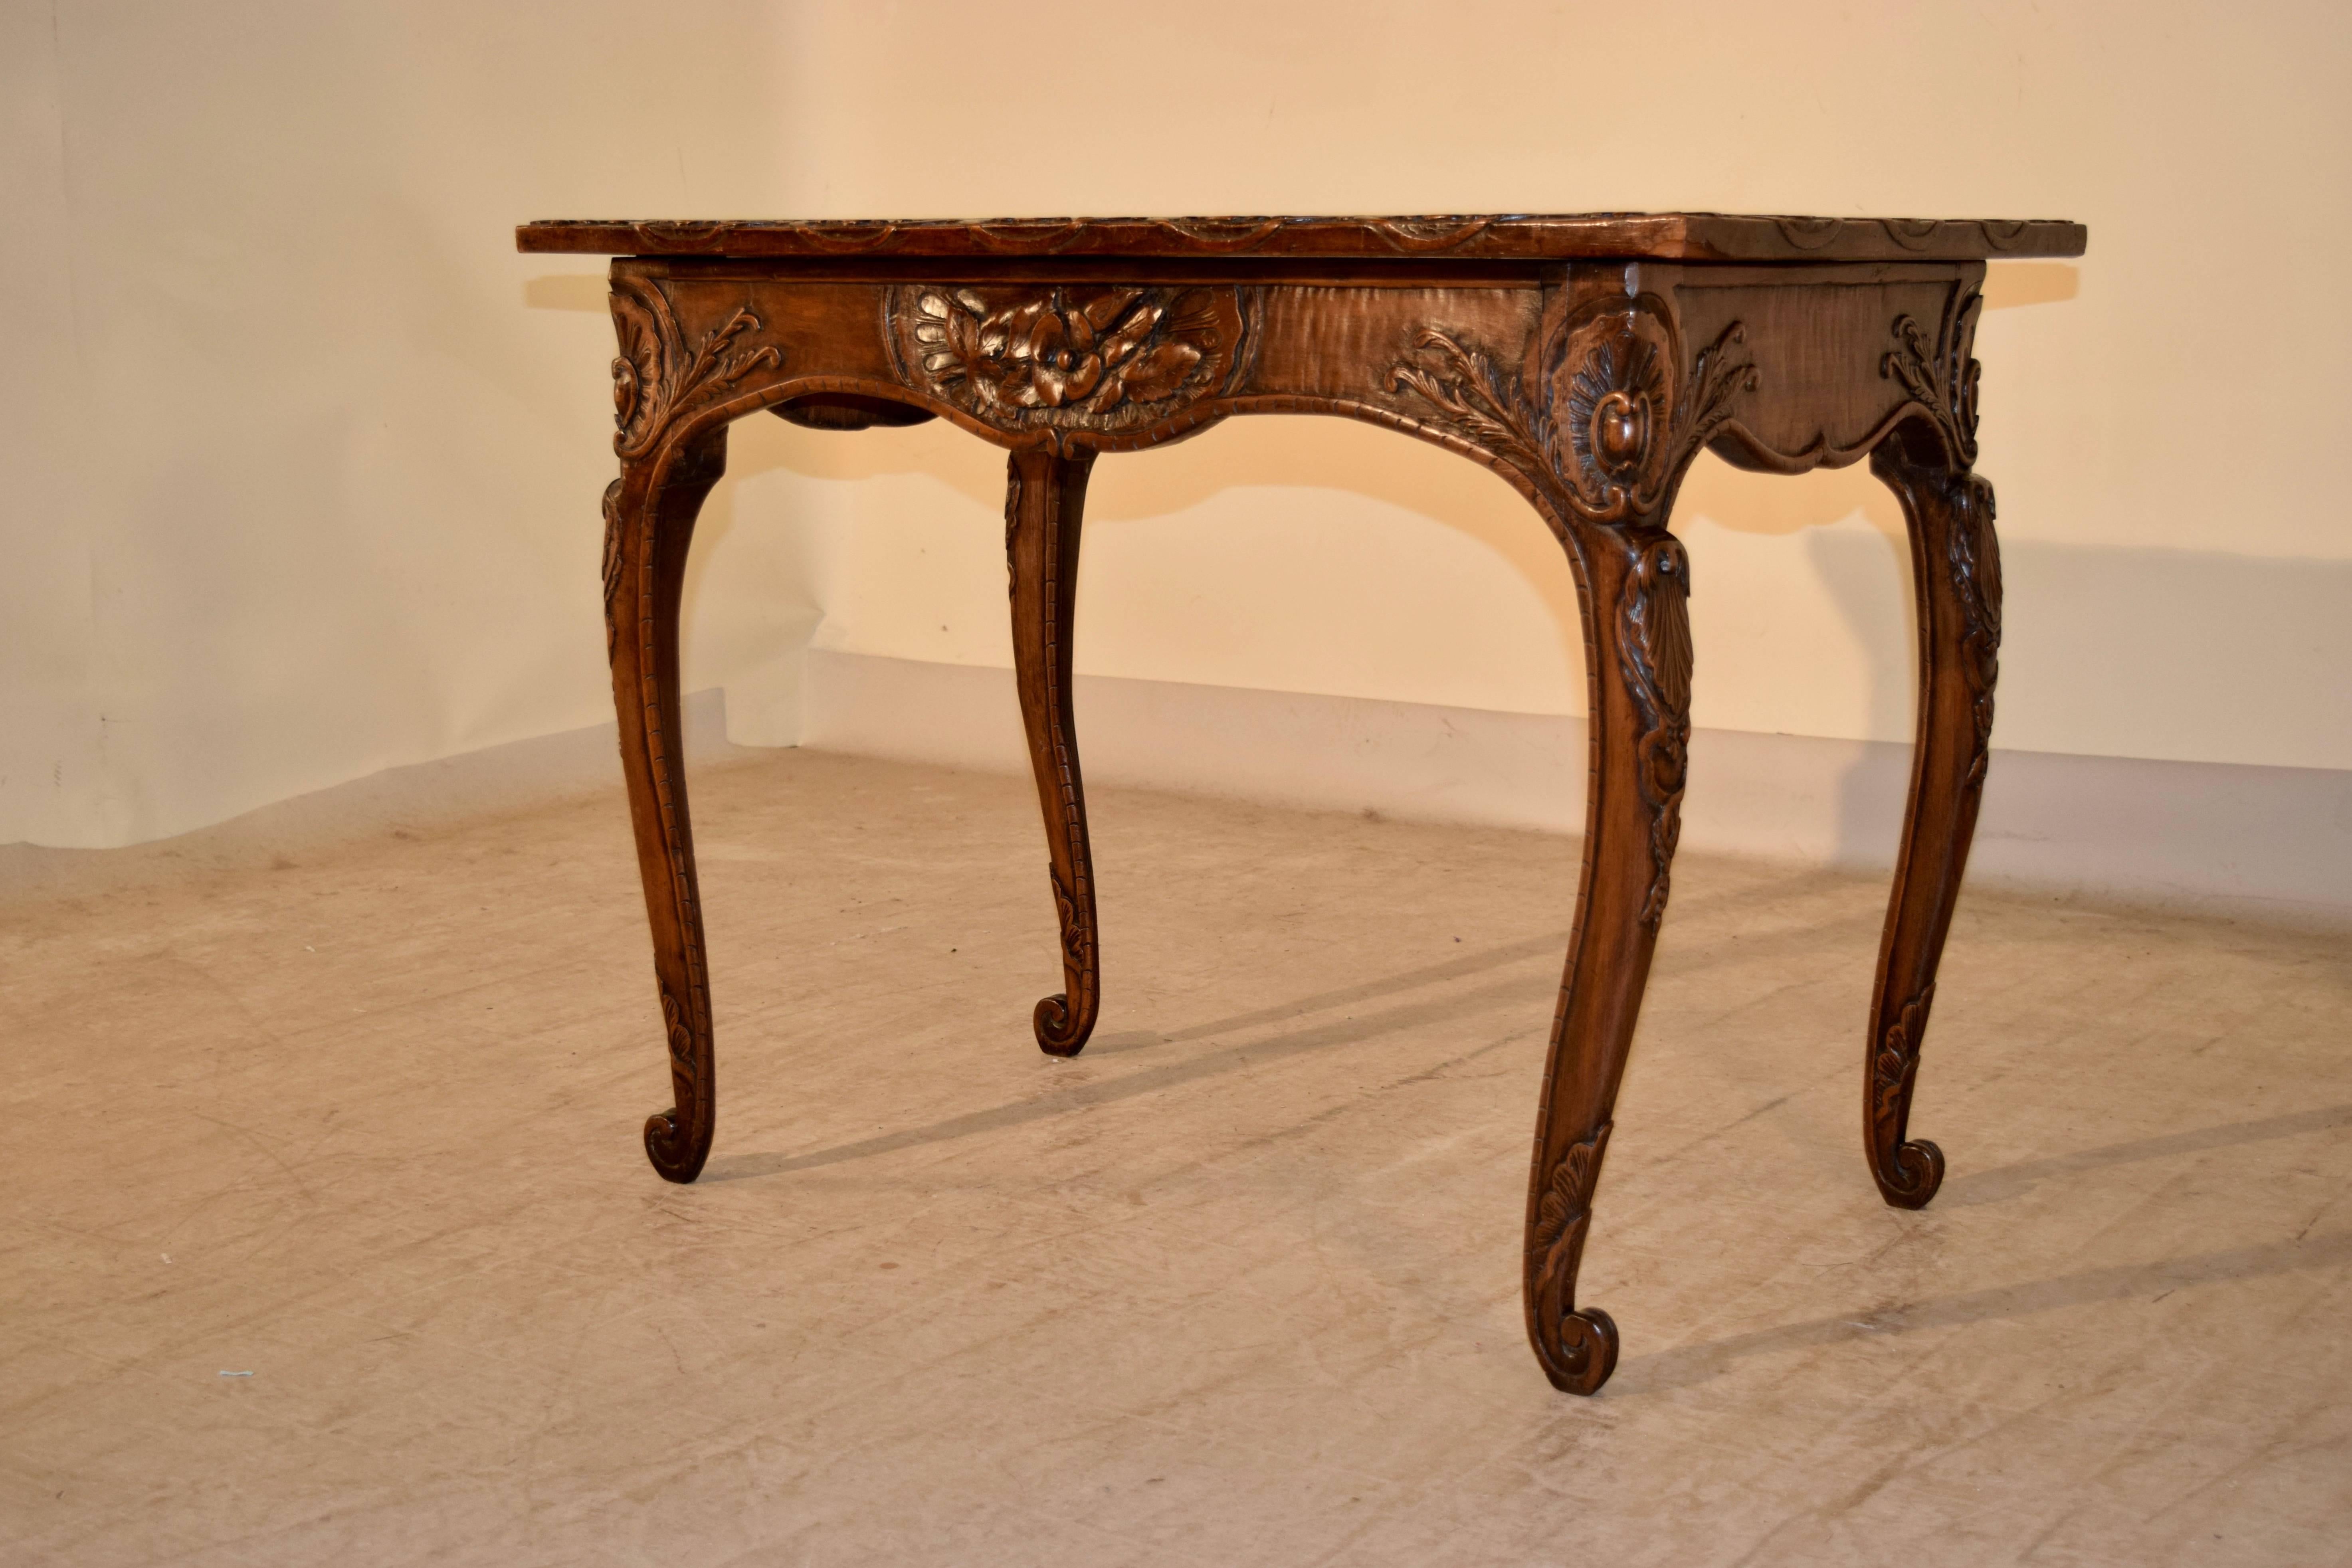 19th century Irish table made from walnut. The top is banded with exquisite carving in a shell pattern, following down to a scalloped apron, which has caved central cartouche with florals, and each corner also carved to accentuate the cabriole legs